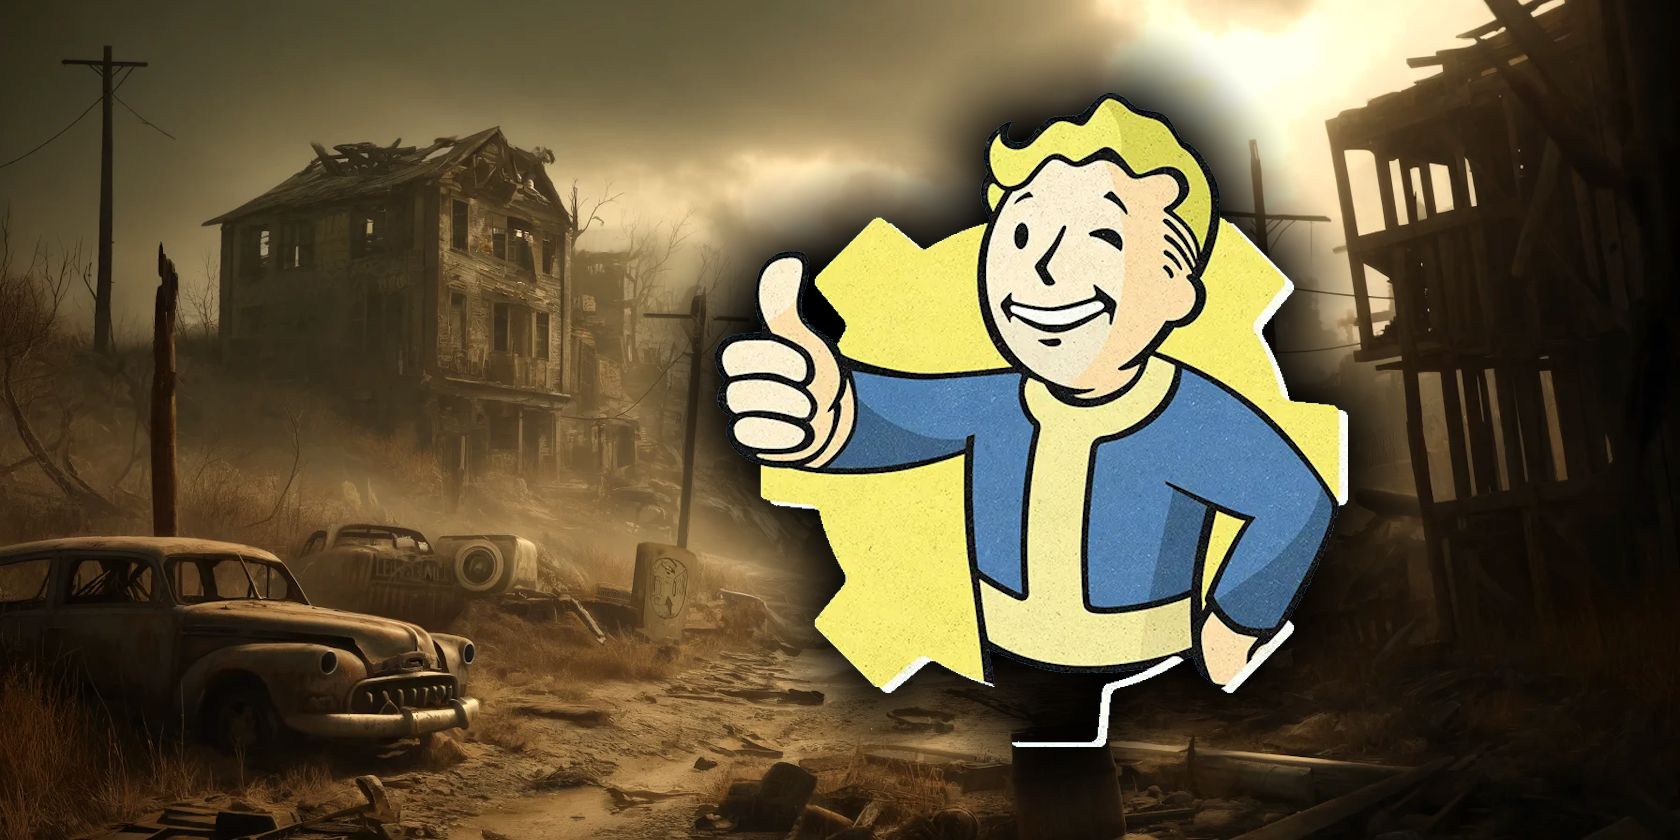 fallout vault boy with post apocalyptic background